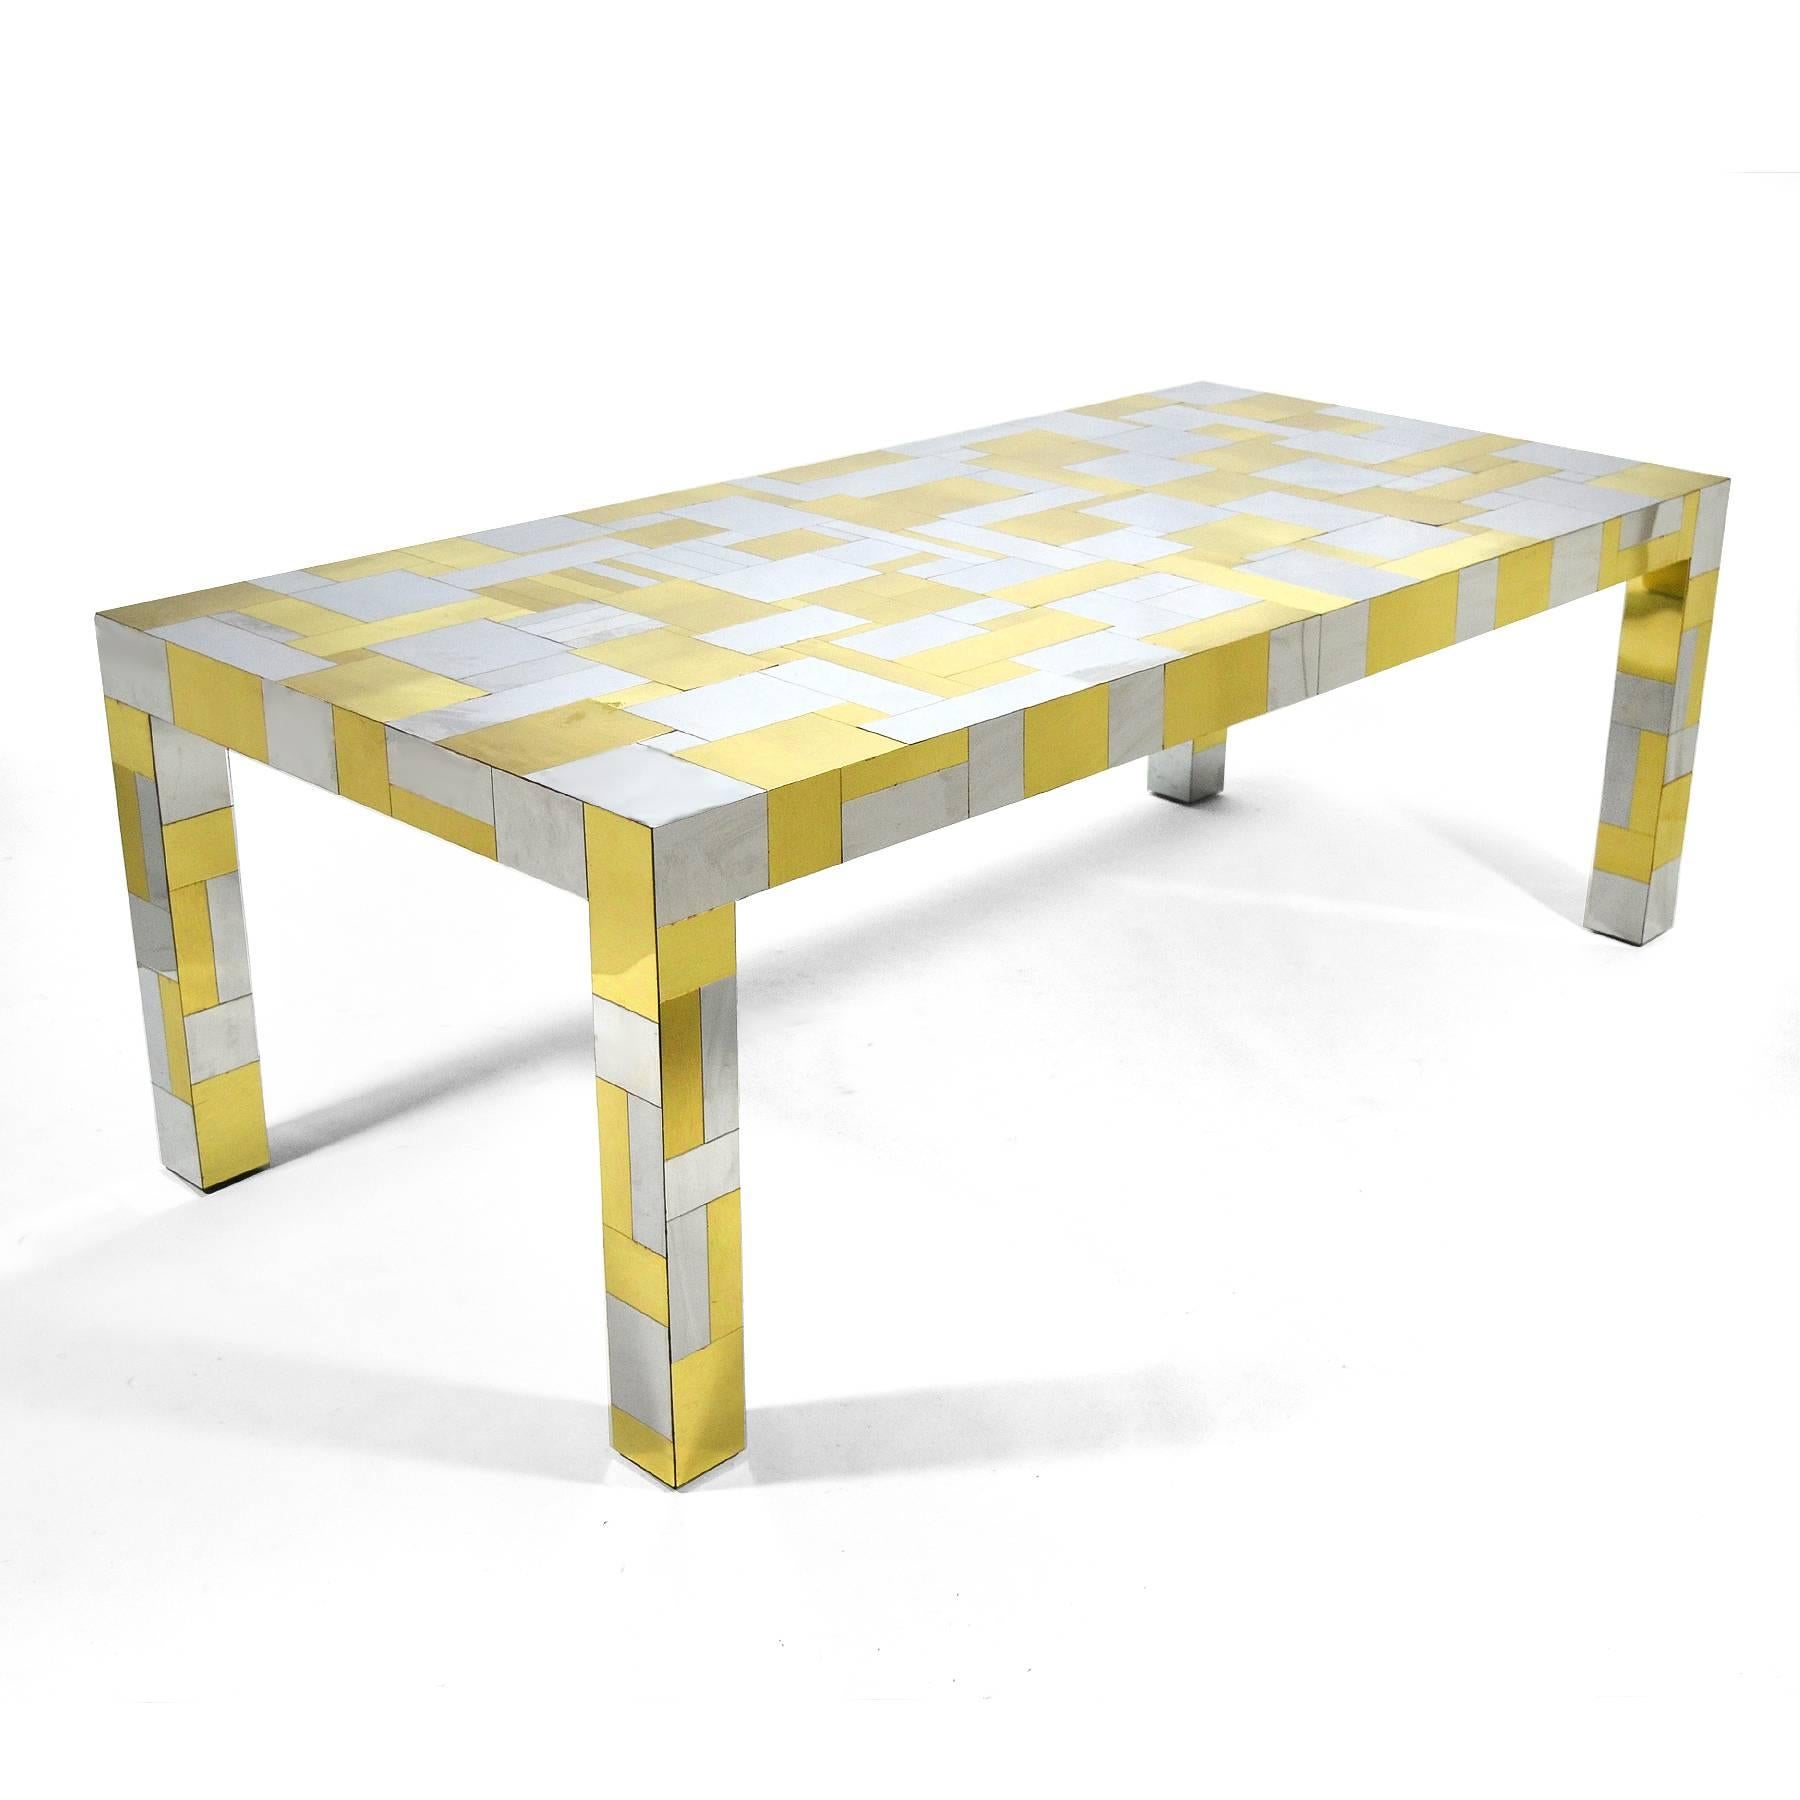 This large and dramatic dining table by Paul Evans is from his PE 200 Cityscape series and is covered in a patchwork of brass and chrome. The Parsons table form is 80